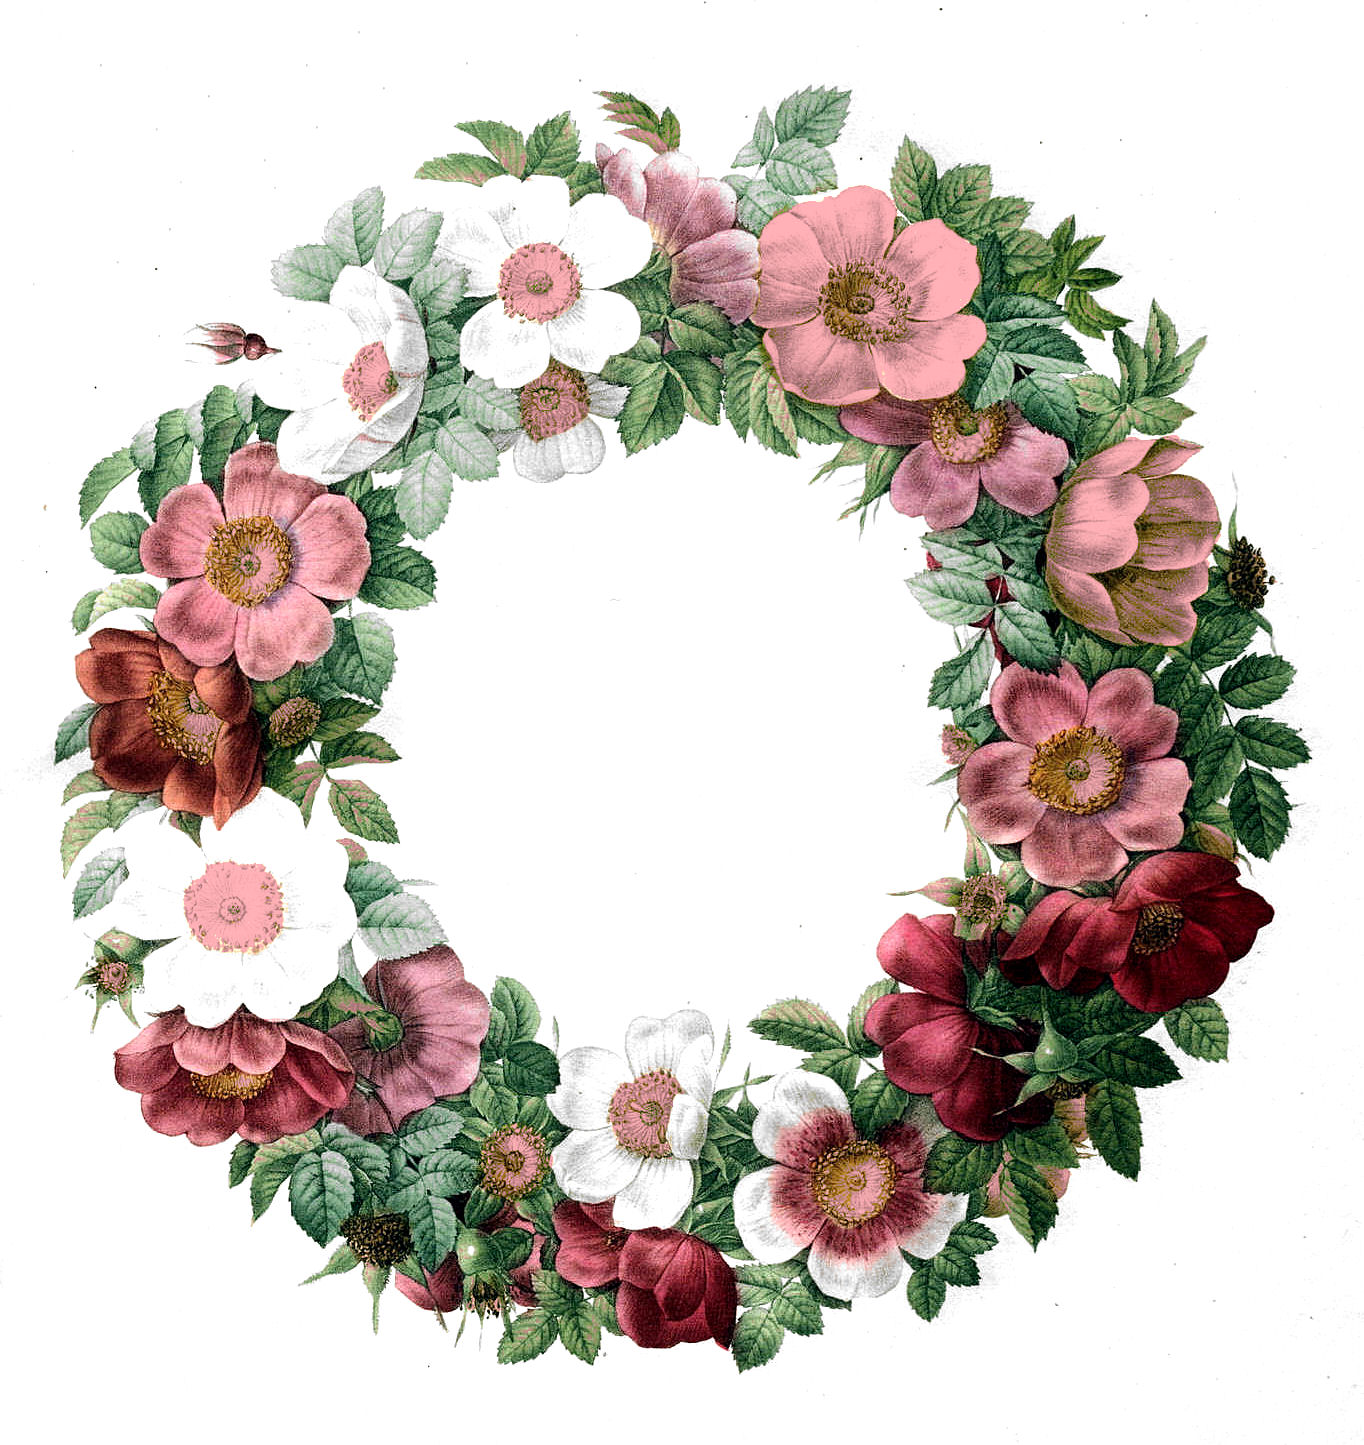 Free Vintage Clip Art - Rose Wreath - The Graphics Fairy